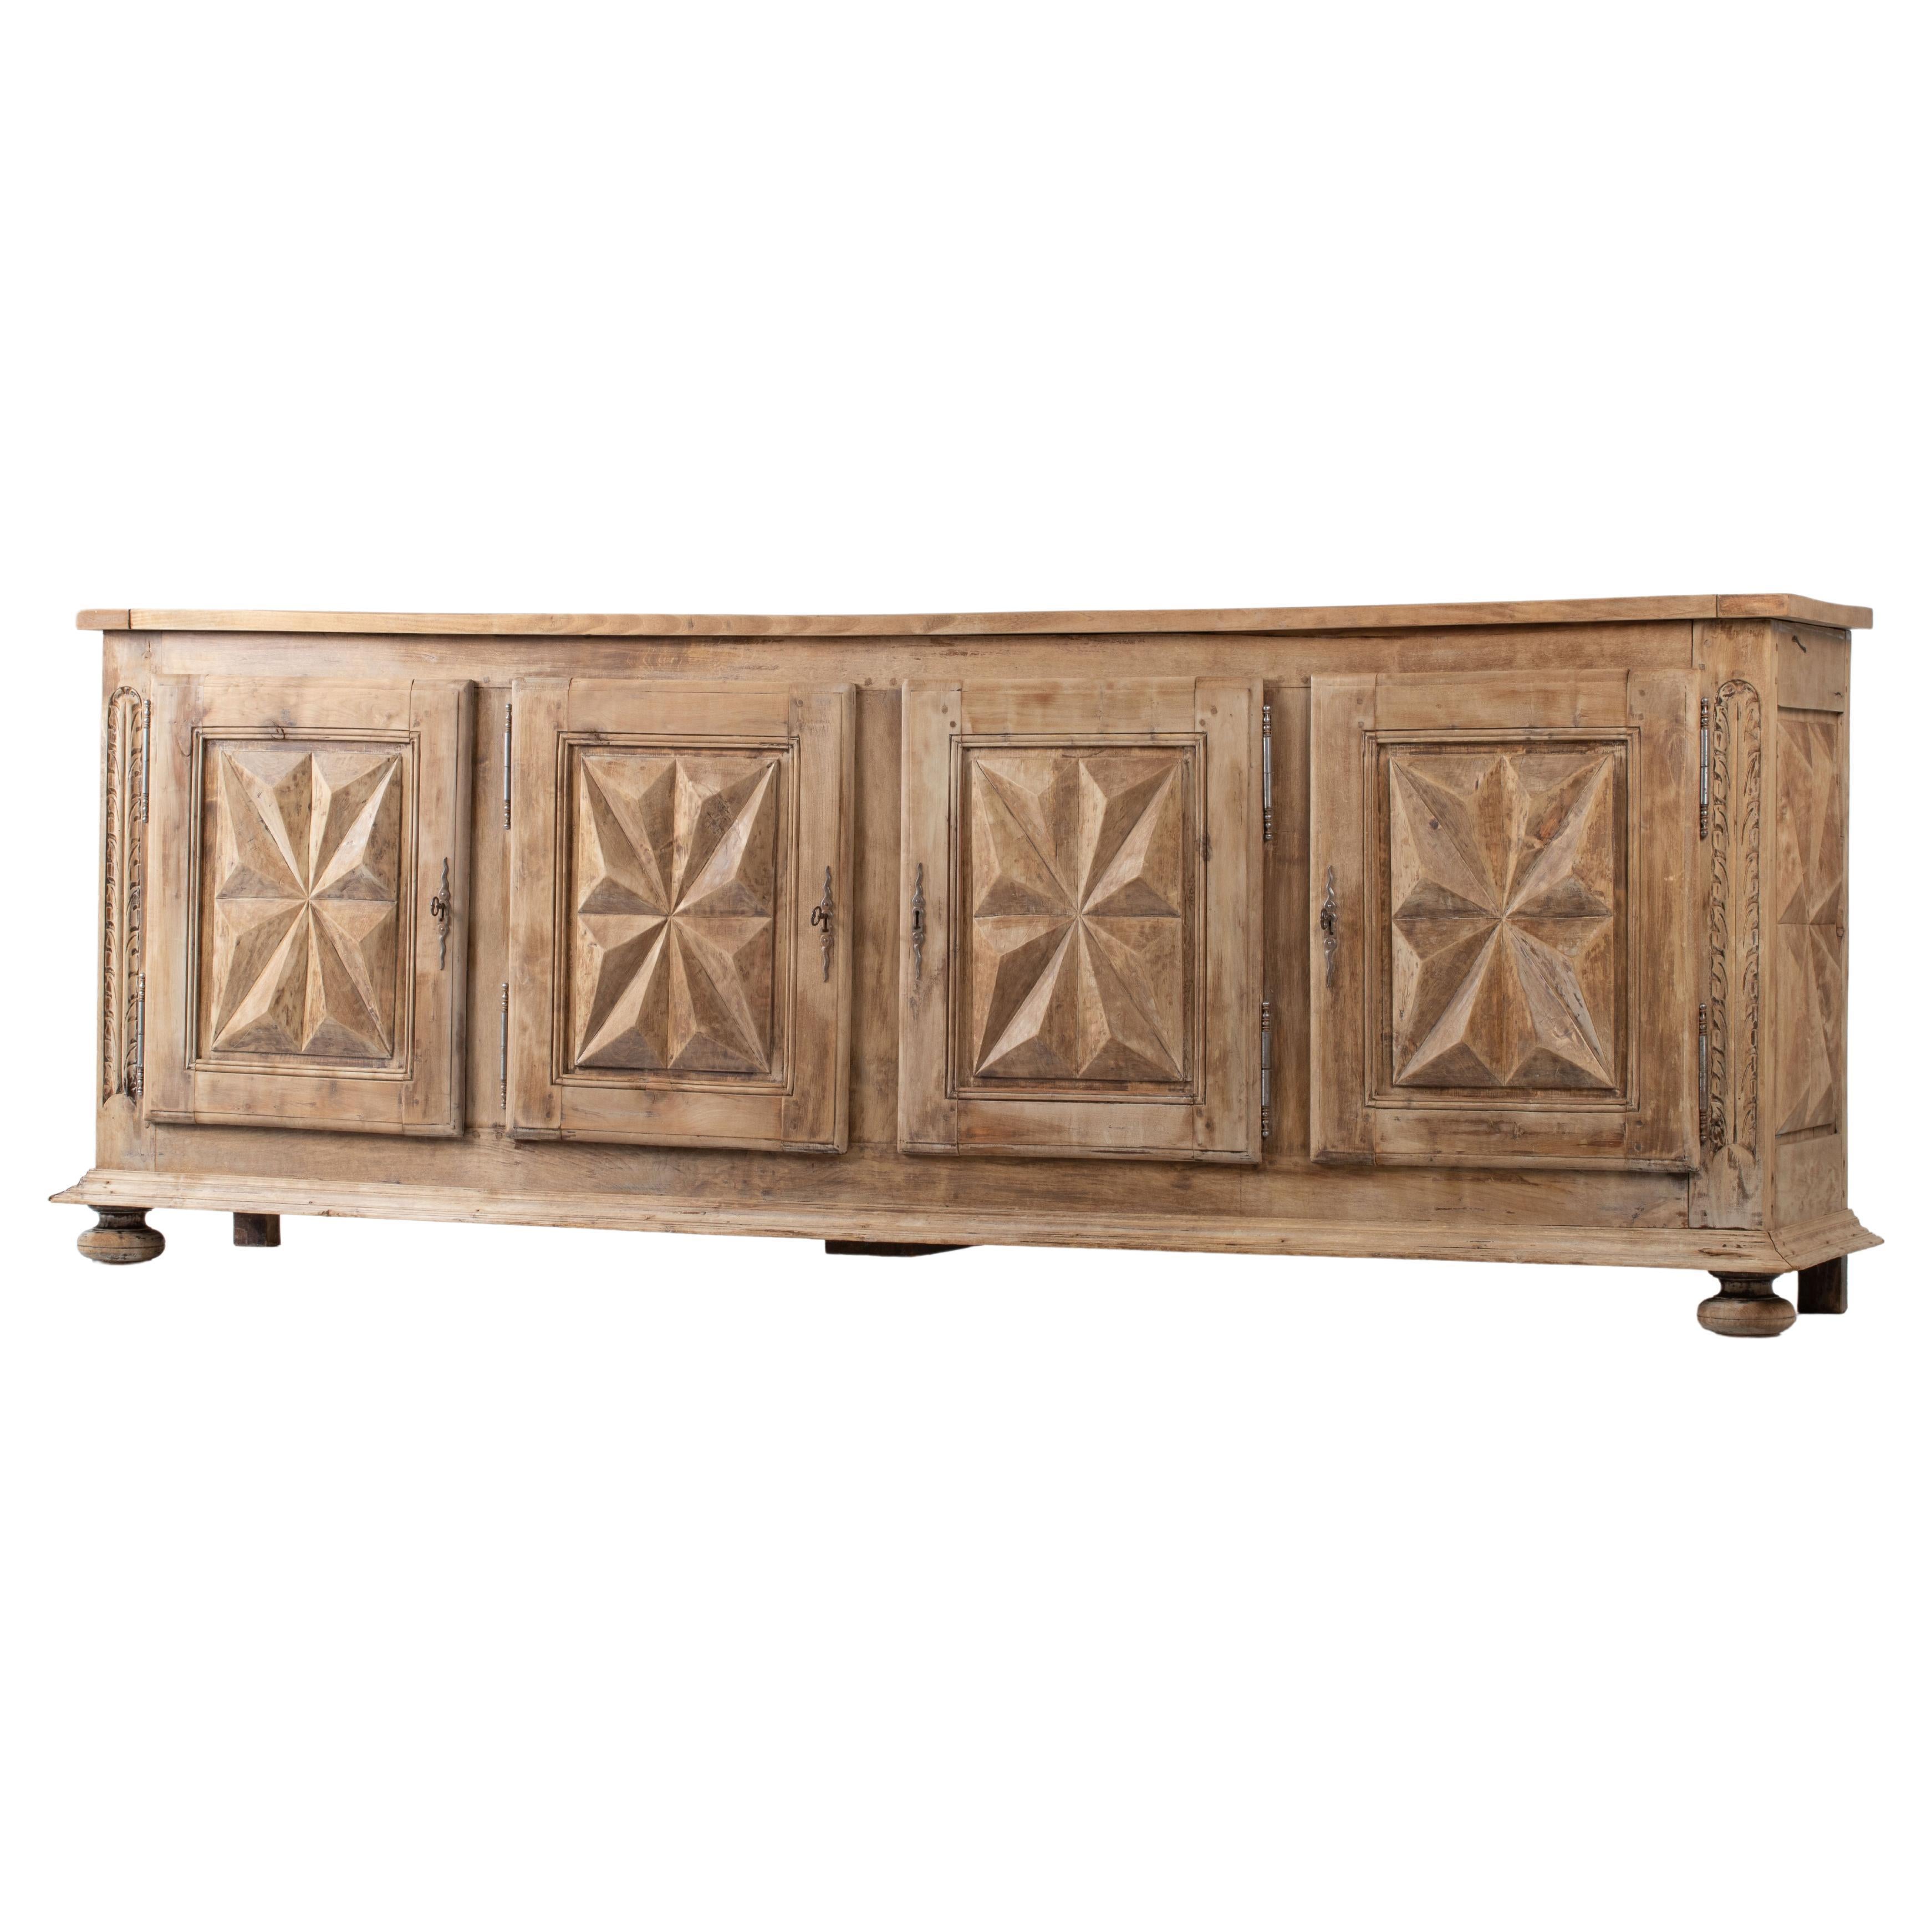 Solid Elm Sideboard, Louis XIII style, France